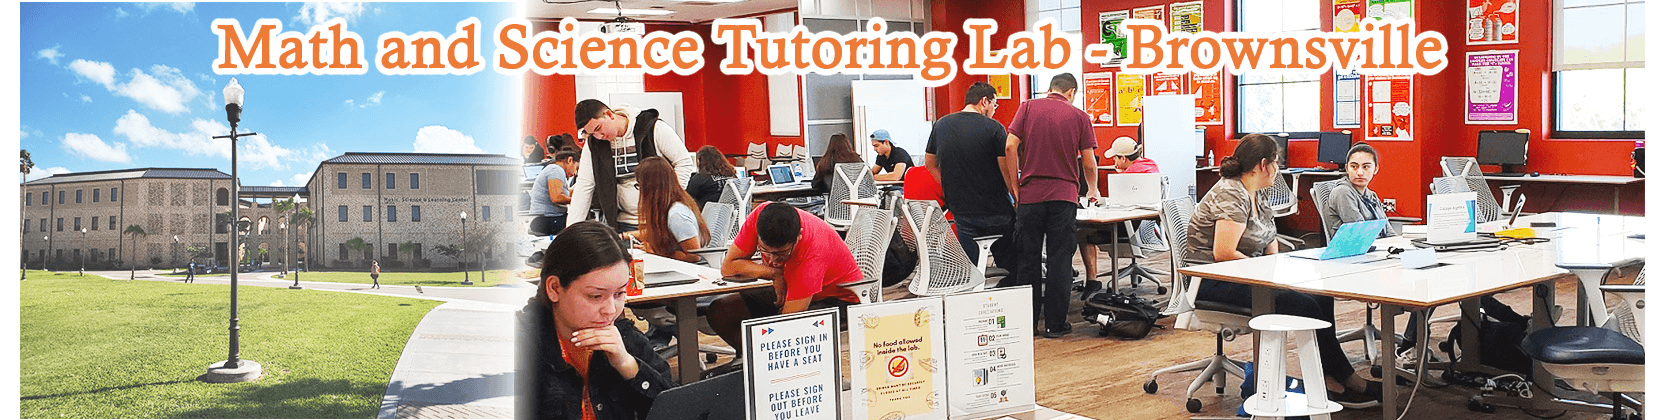 Math And Science Tutoring Lab Brownsville